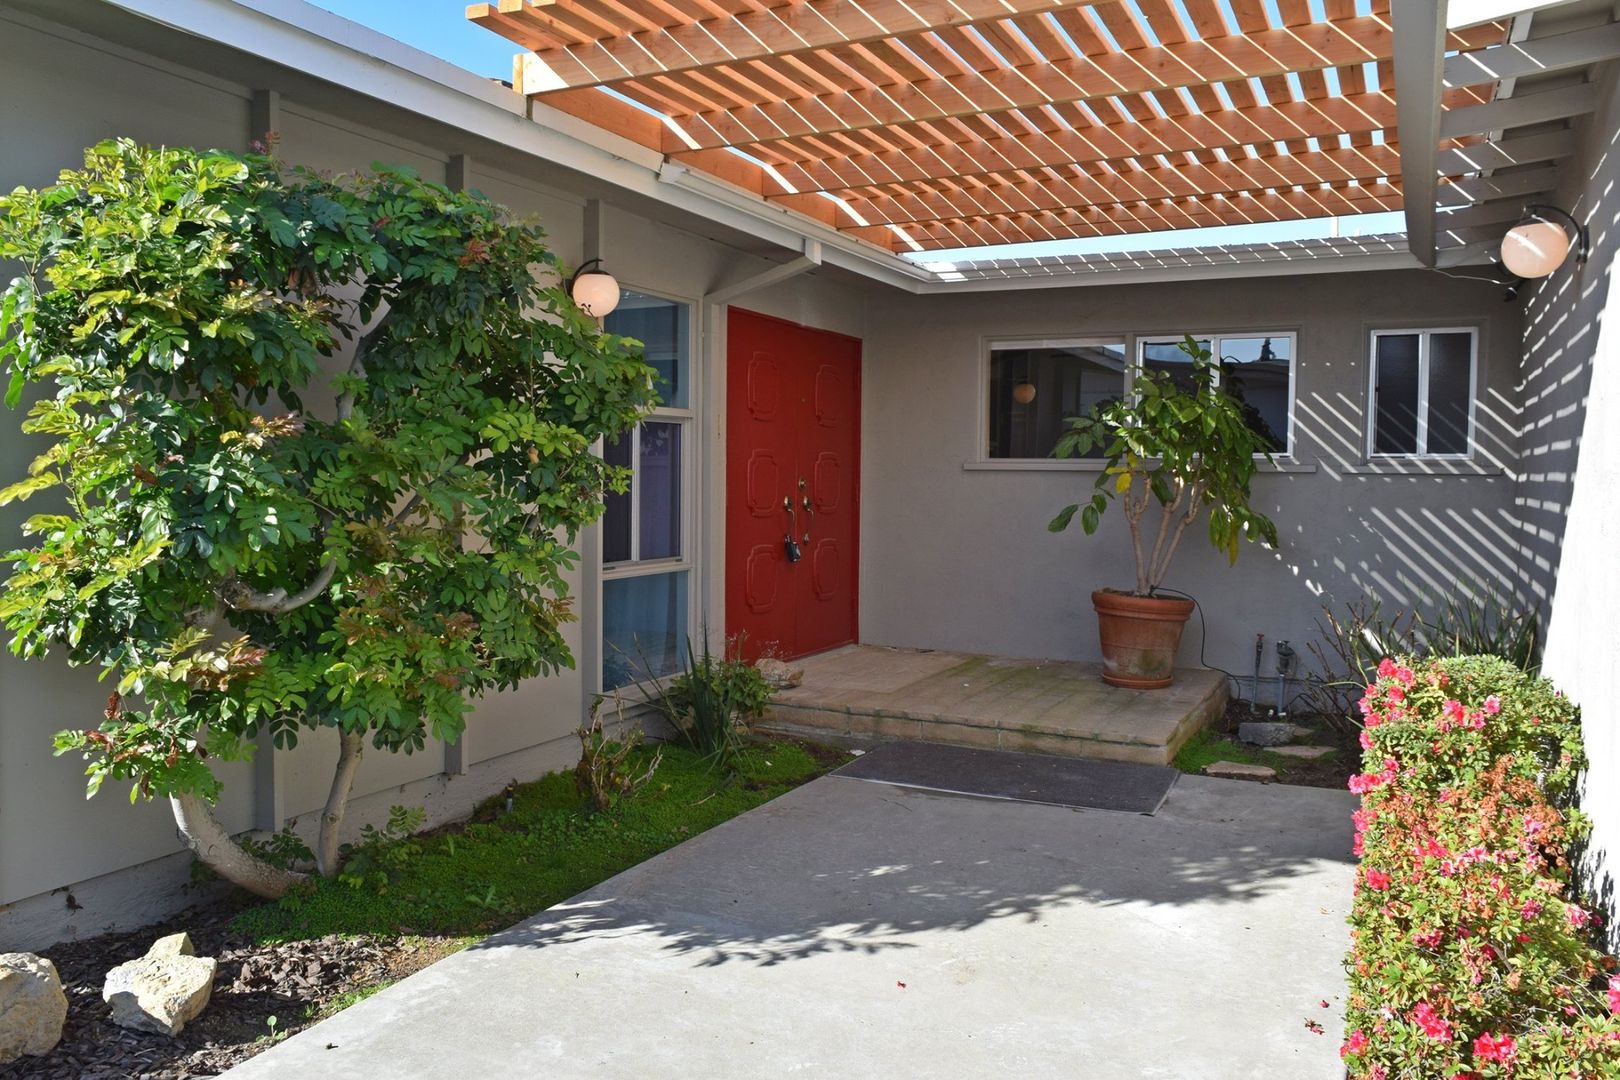 4BR 2.5BA Bay Ho House - Mission Bay Views from Backyard, Freshly Painted, New Carpet, Tons of Natural Light, Pet Friendly